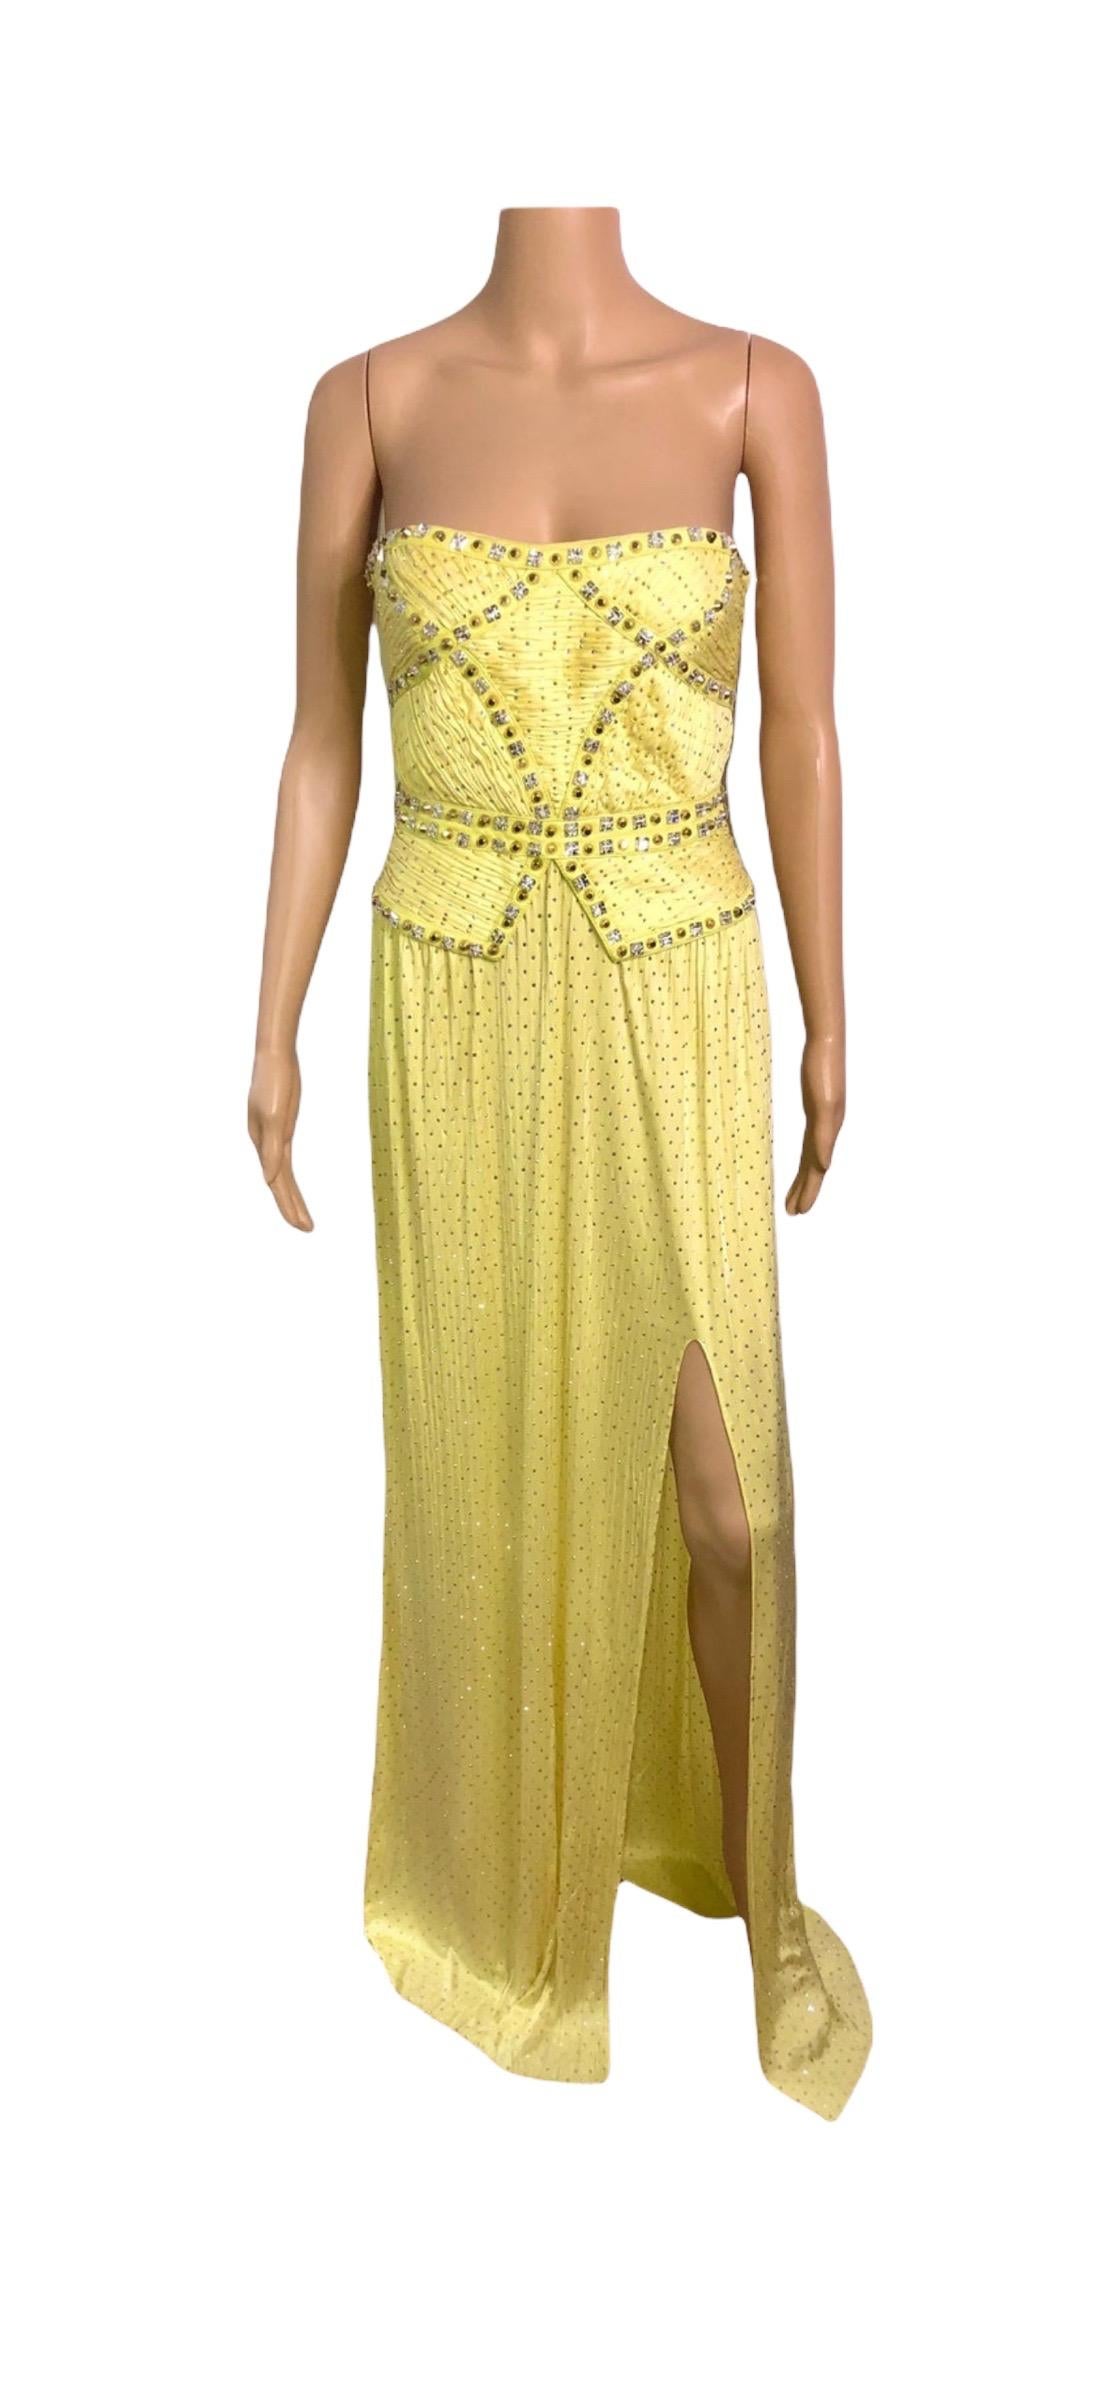 Versace S/S 2012 Runway Bustier Corset Crystal Embellished Evening Dress Gown  For Sale 3